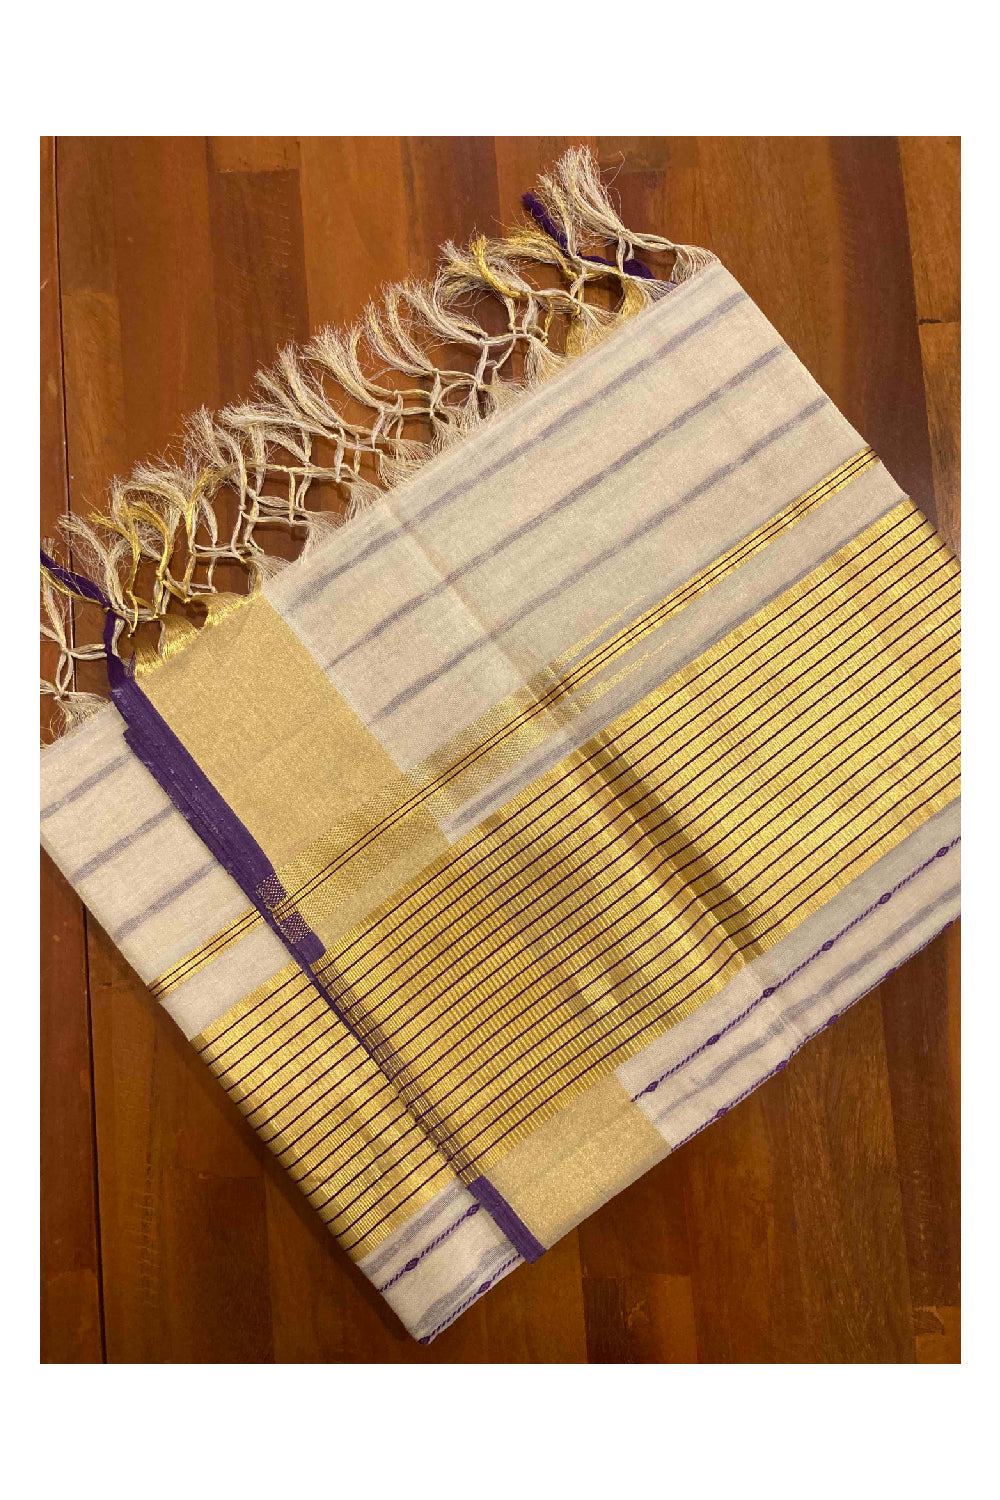 Southloom Kuthampully Handloom Tissue Saree with Kasavu and Violet Stripes Body